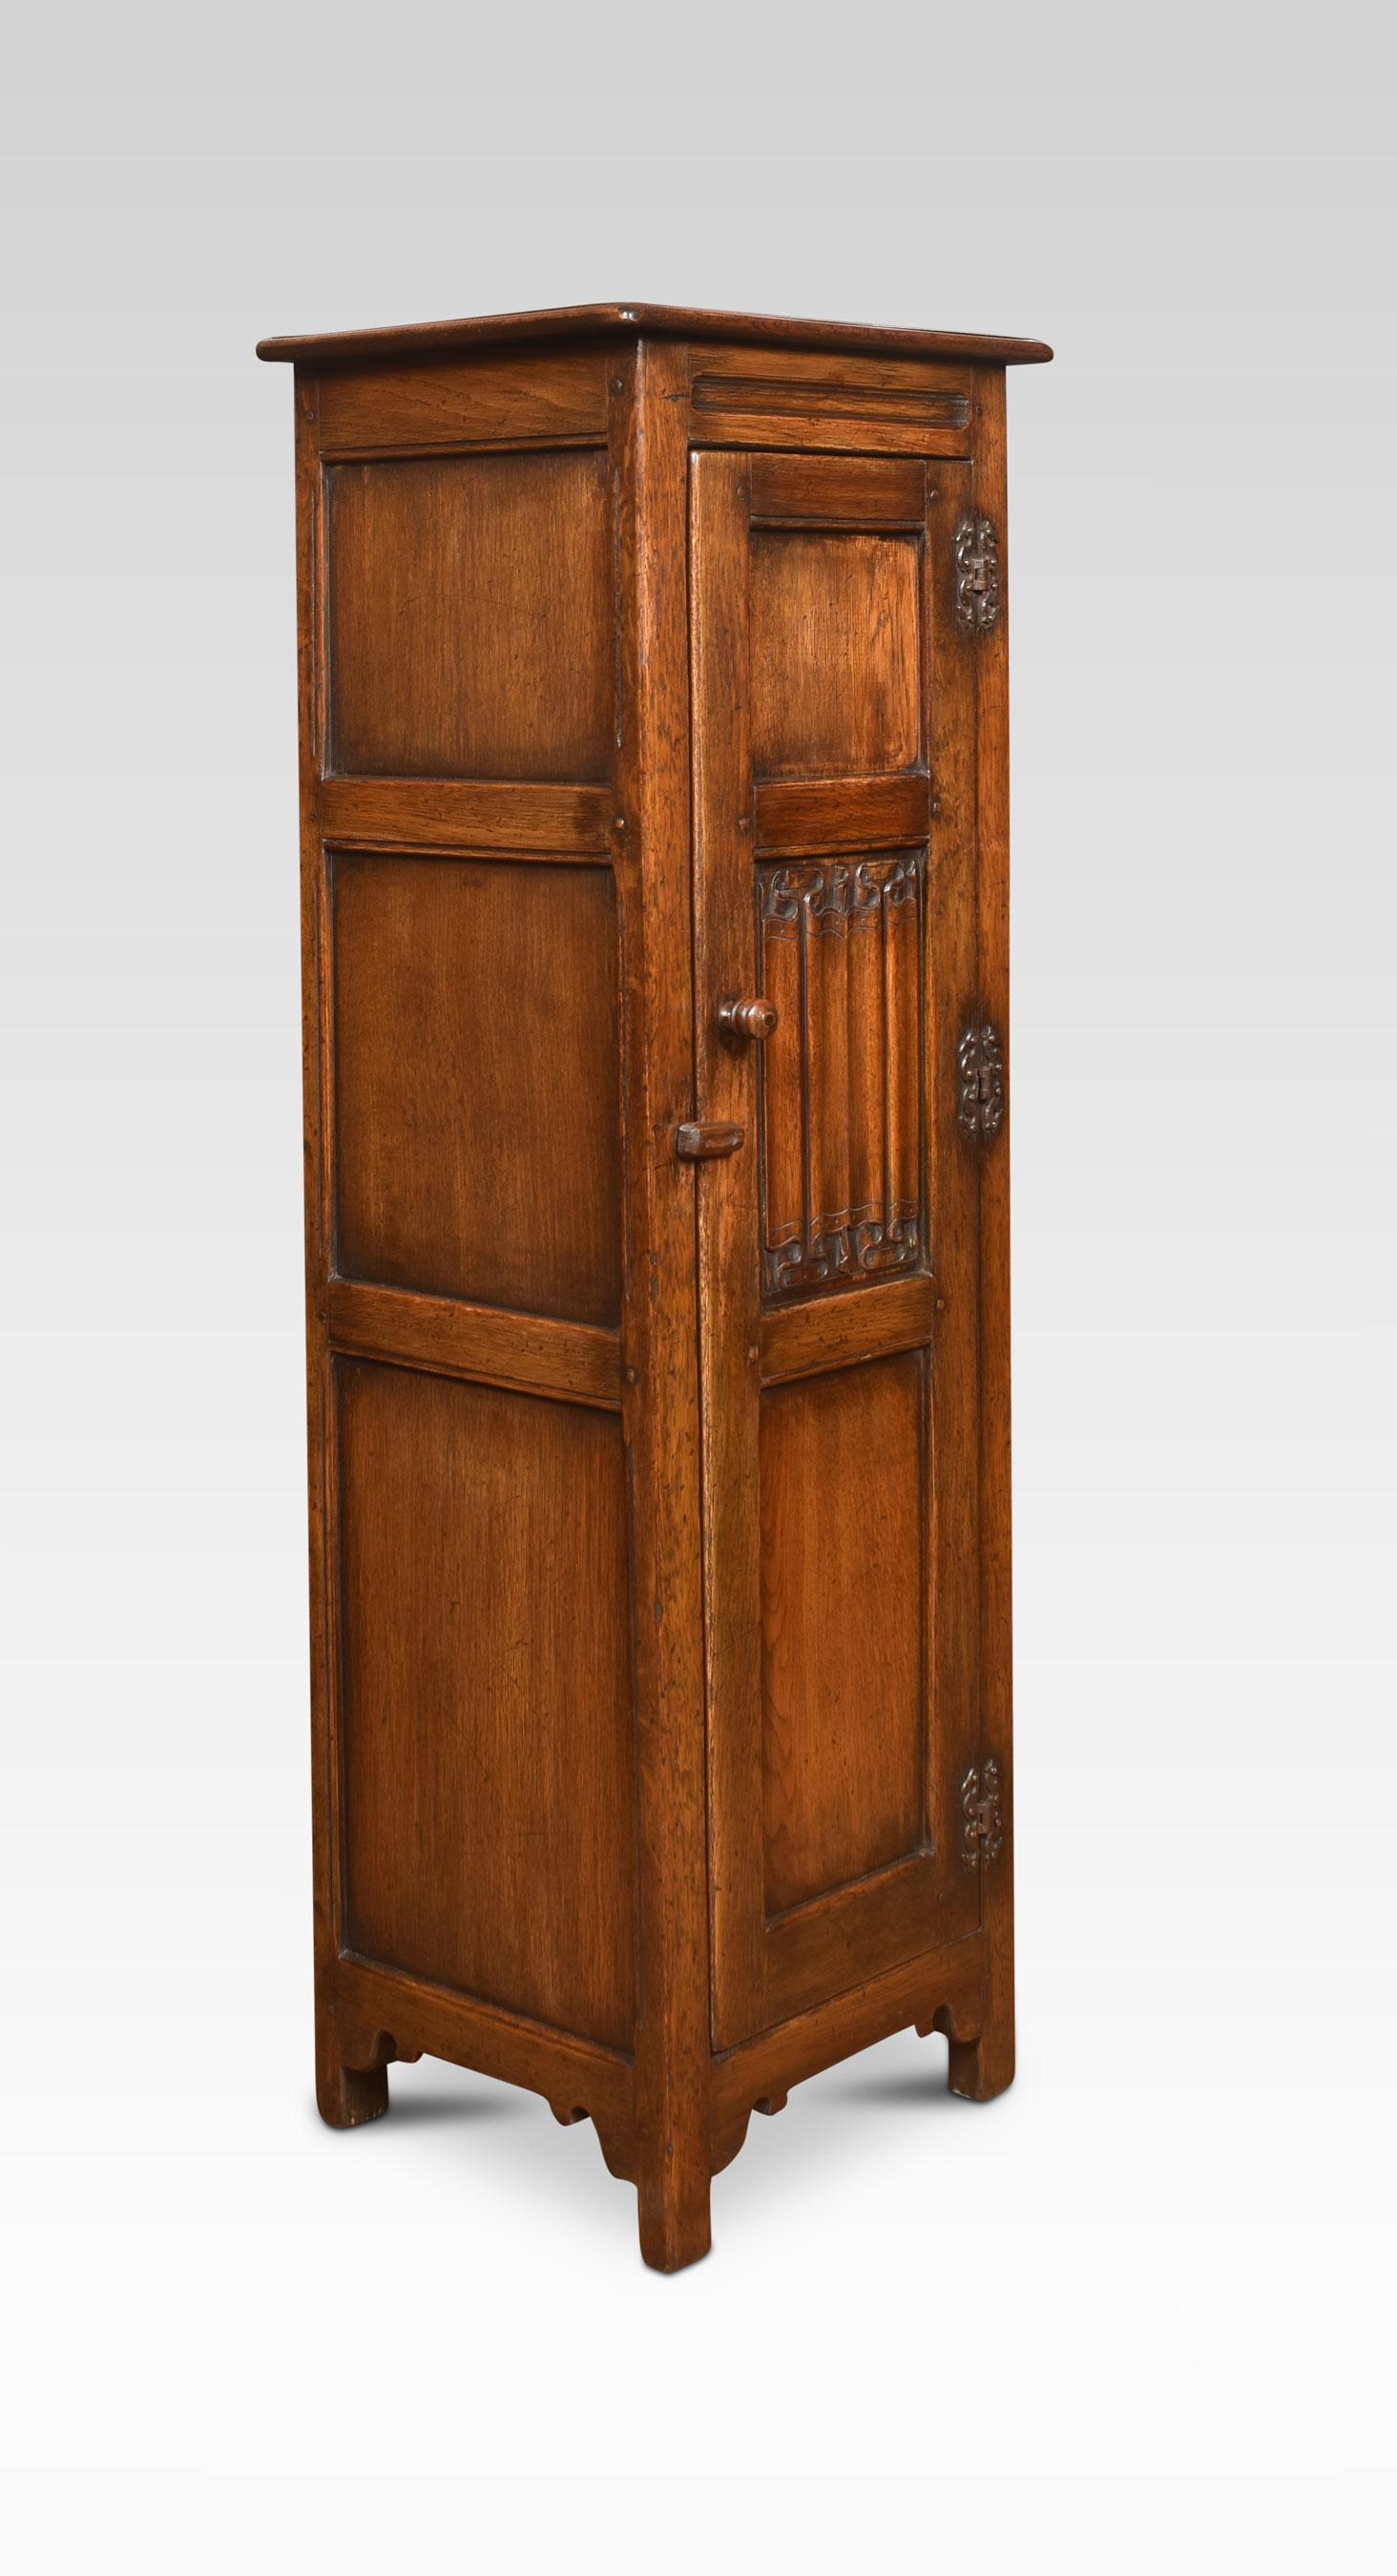 Carved oak bonnetiere petite armoire of small proportions, the moulded cornice to the long cupboard door with linen fold decoration. Opening to reveal a shelved interior. All raised up on style feet.
Dimensions
Height 54 inches
Width 17.5